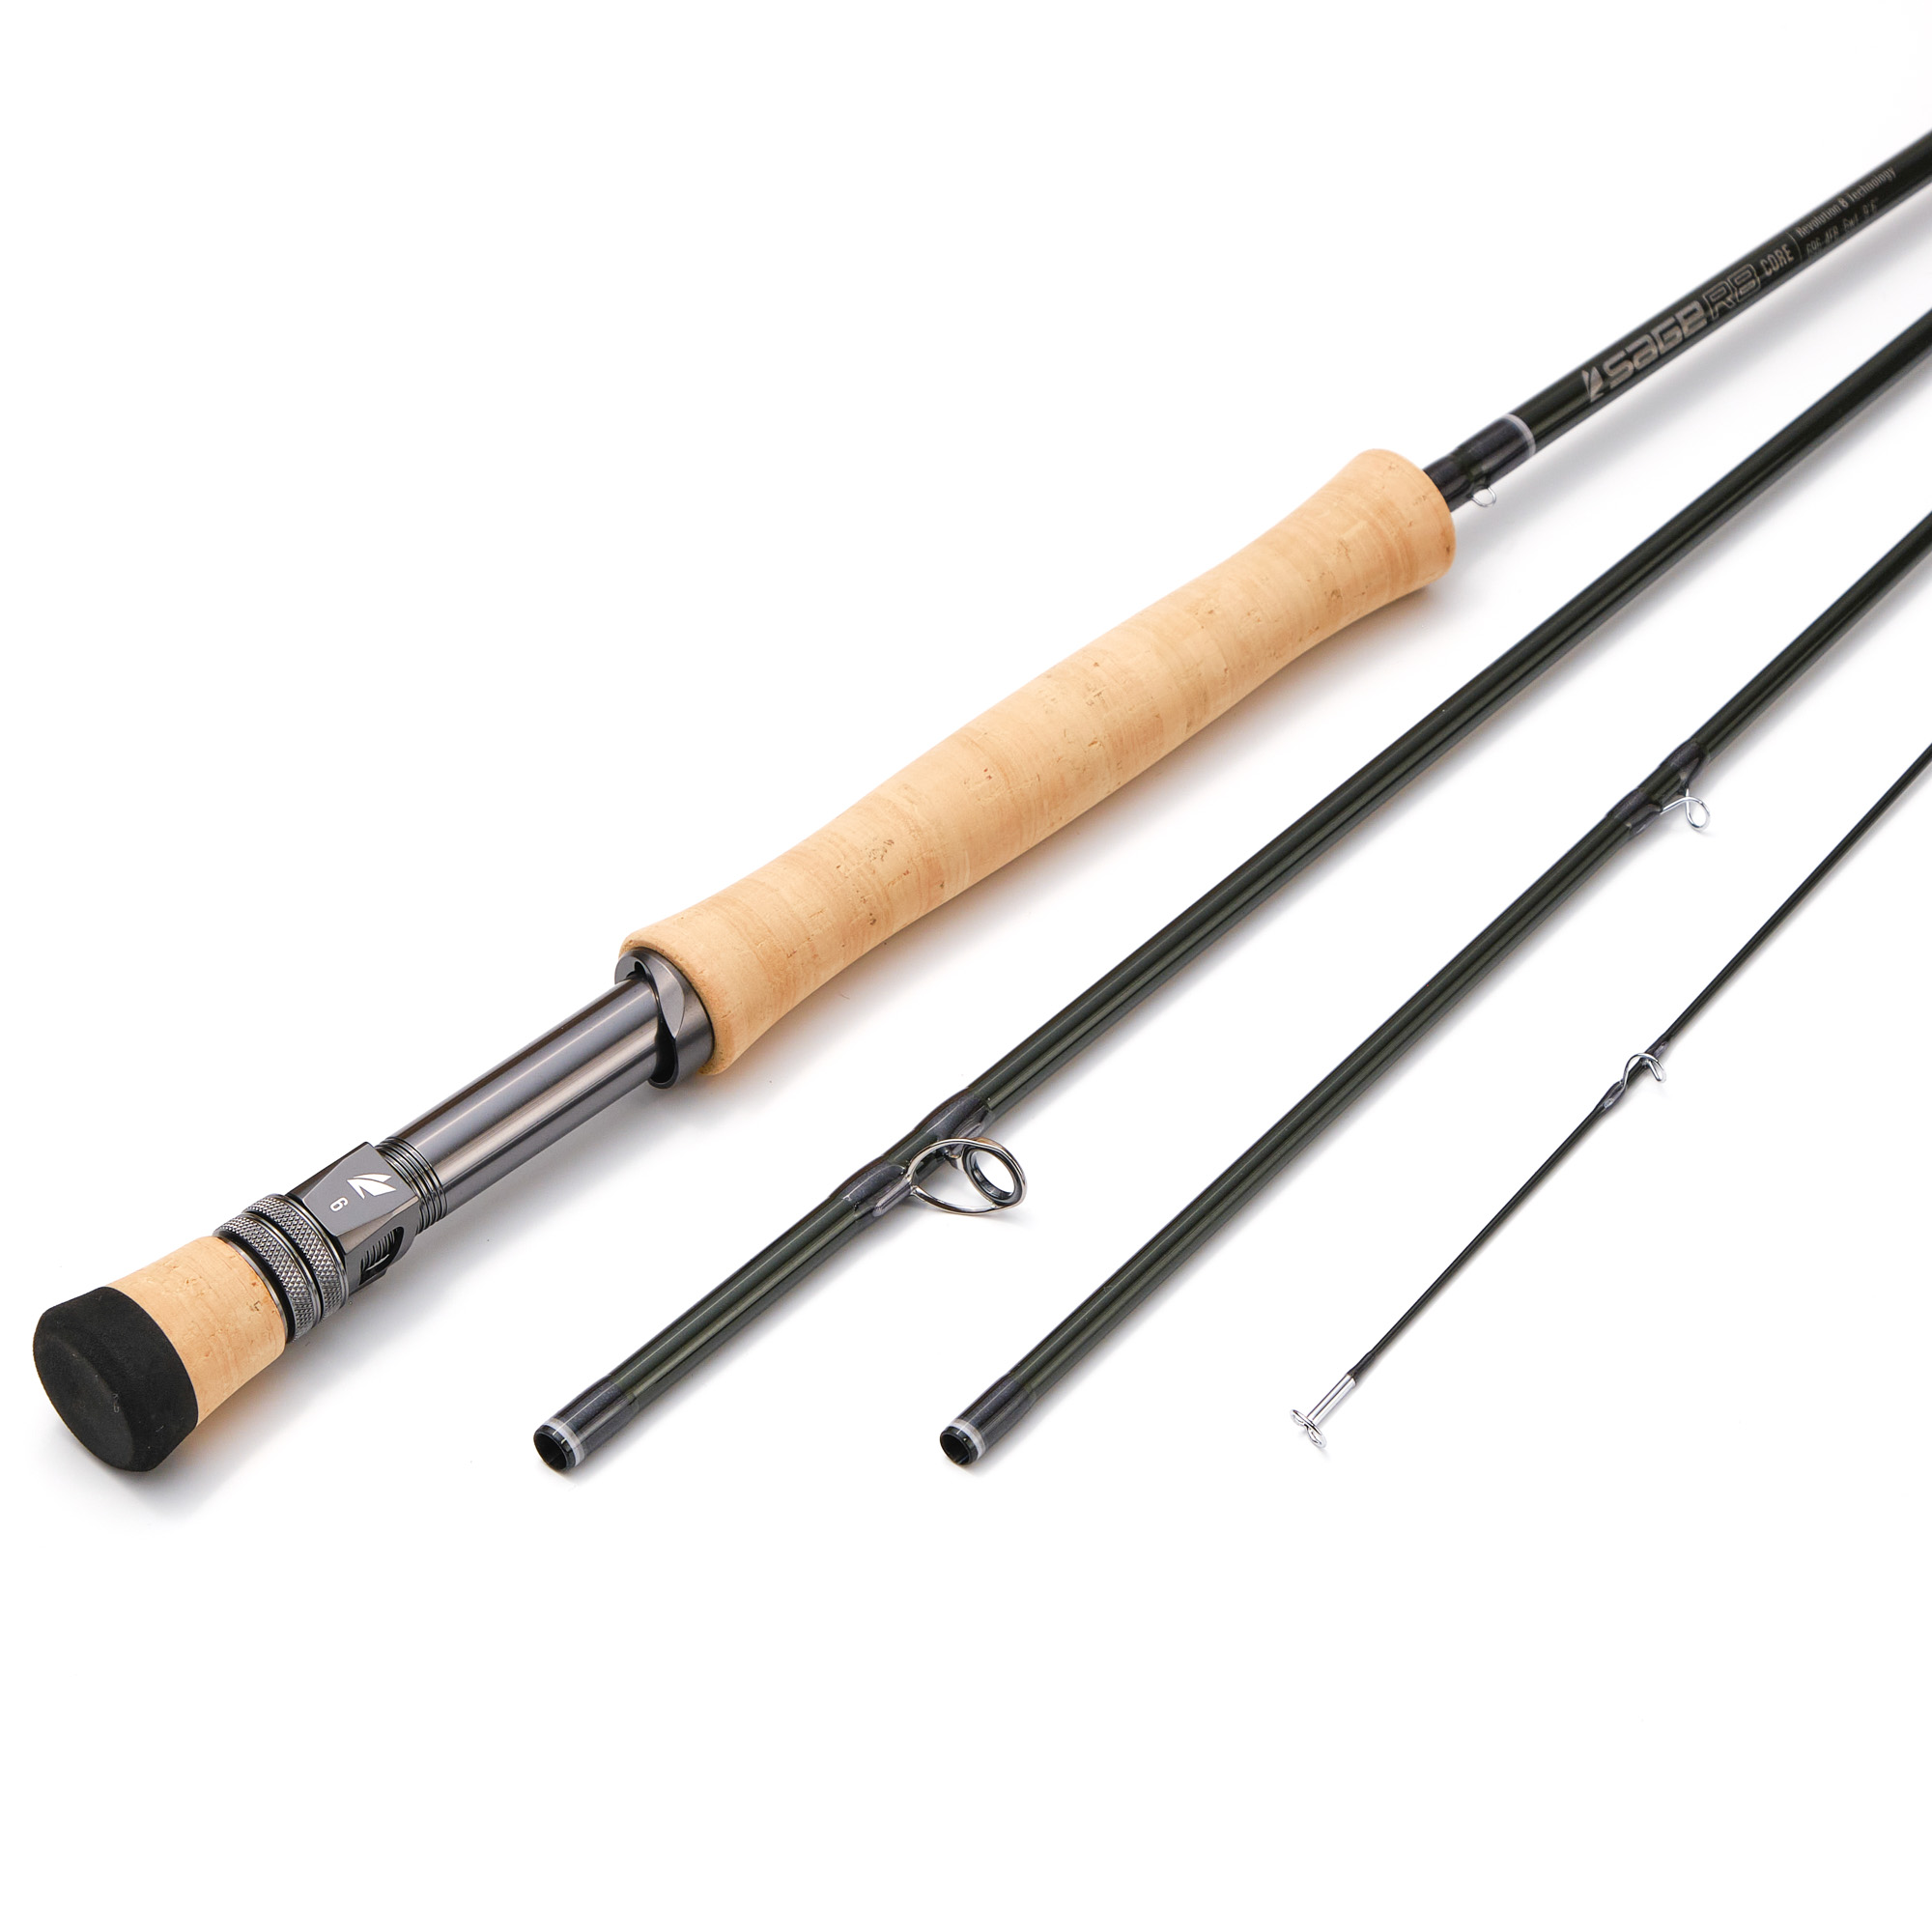 Sage R8 Core Fly Rod – Guide Flyfishing, Fly Fishing Rods, Reels, Sage, Redington, RIO